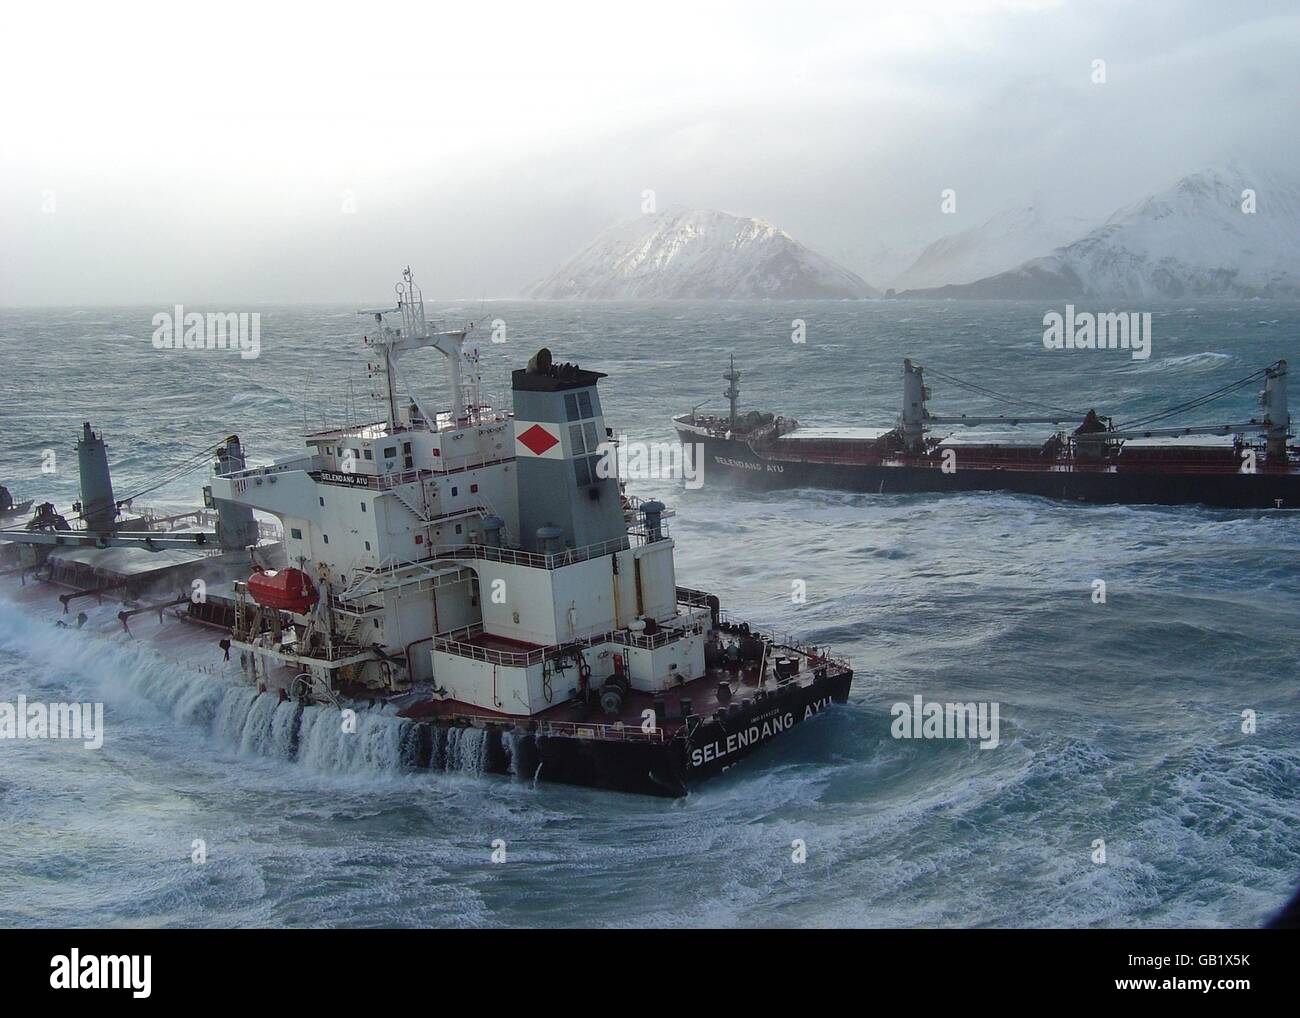 The M/V Selendang Ayu flounders on rocky shoals on the west side of Unalaska Island November 28, 2004 in the Aleutian Islands, Alaska. The vessel broke in two, releasing more than 337,000 gallons of petroleum fuel load of IFO-380 and marine diesel. Stock Photo